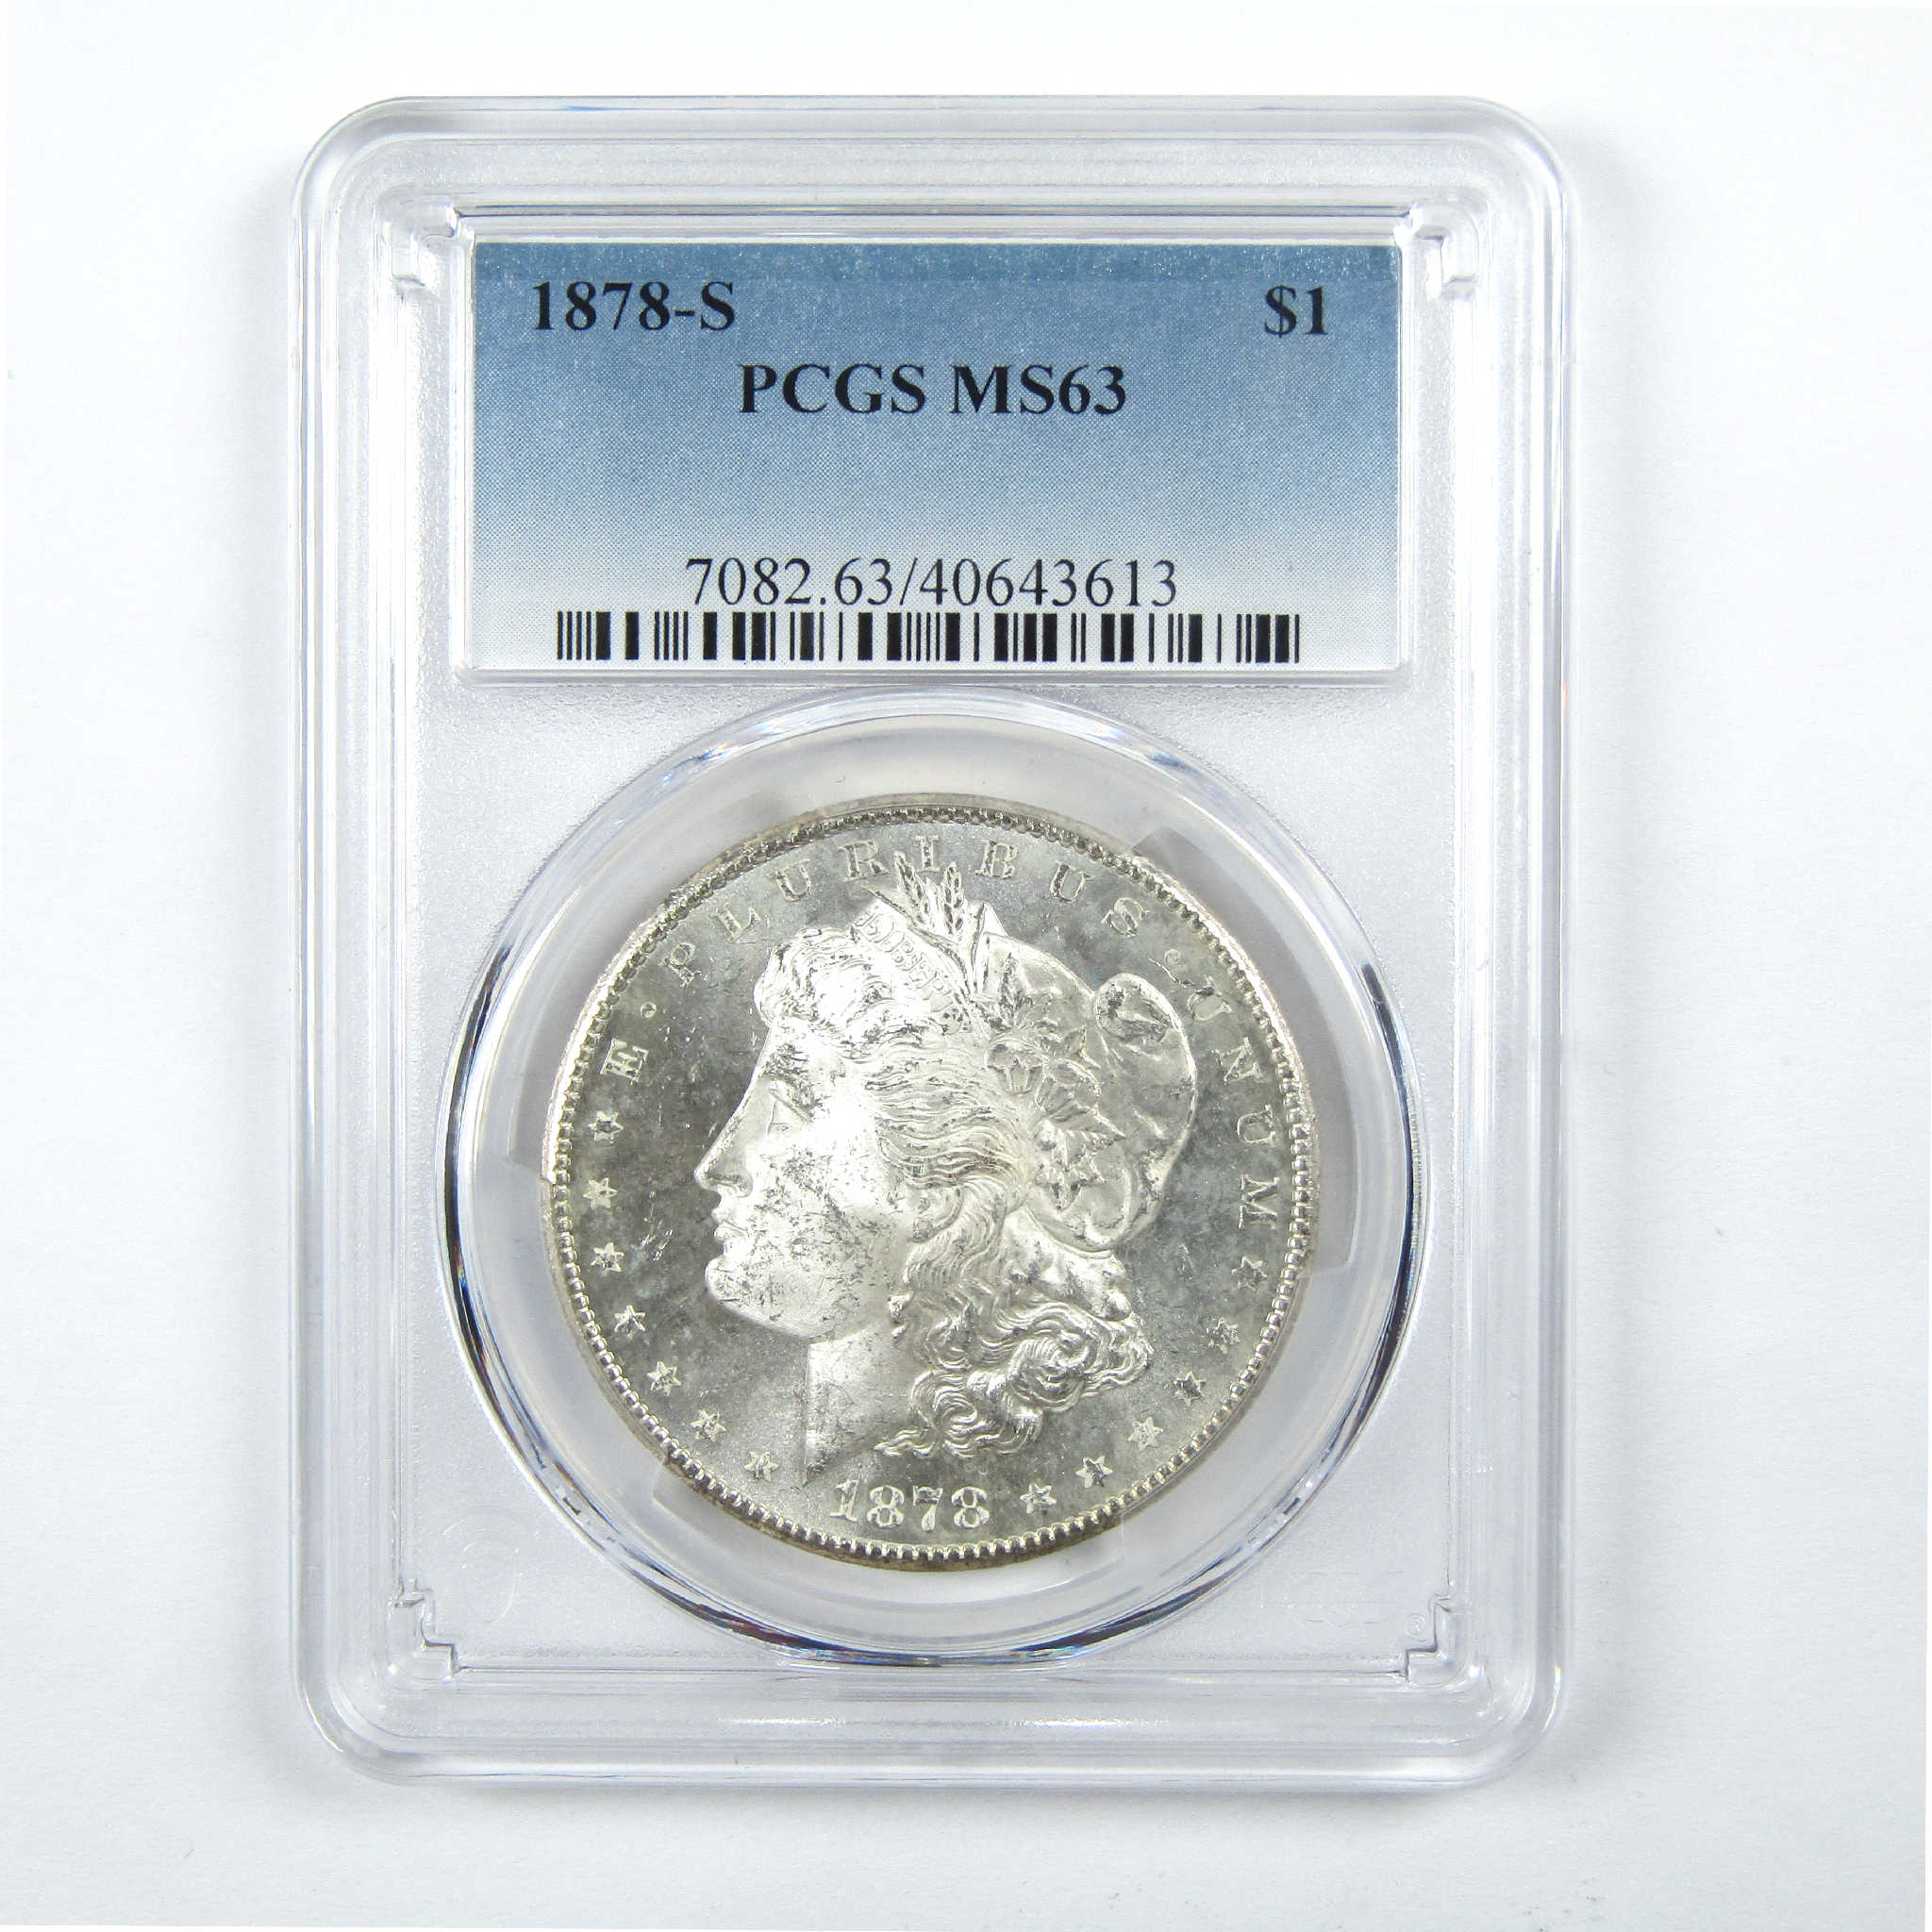 1878 S Morgan Dollar MS 63 PCGS Silver $1 Uncirculated Coin SKU:I11802 - Morgan coin - Morgan silver dollar - Morgan silver dollar for sale - Profile Coins &amp; Collectibles